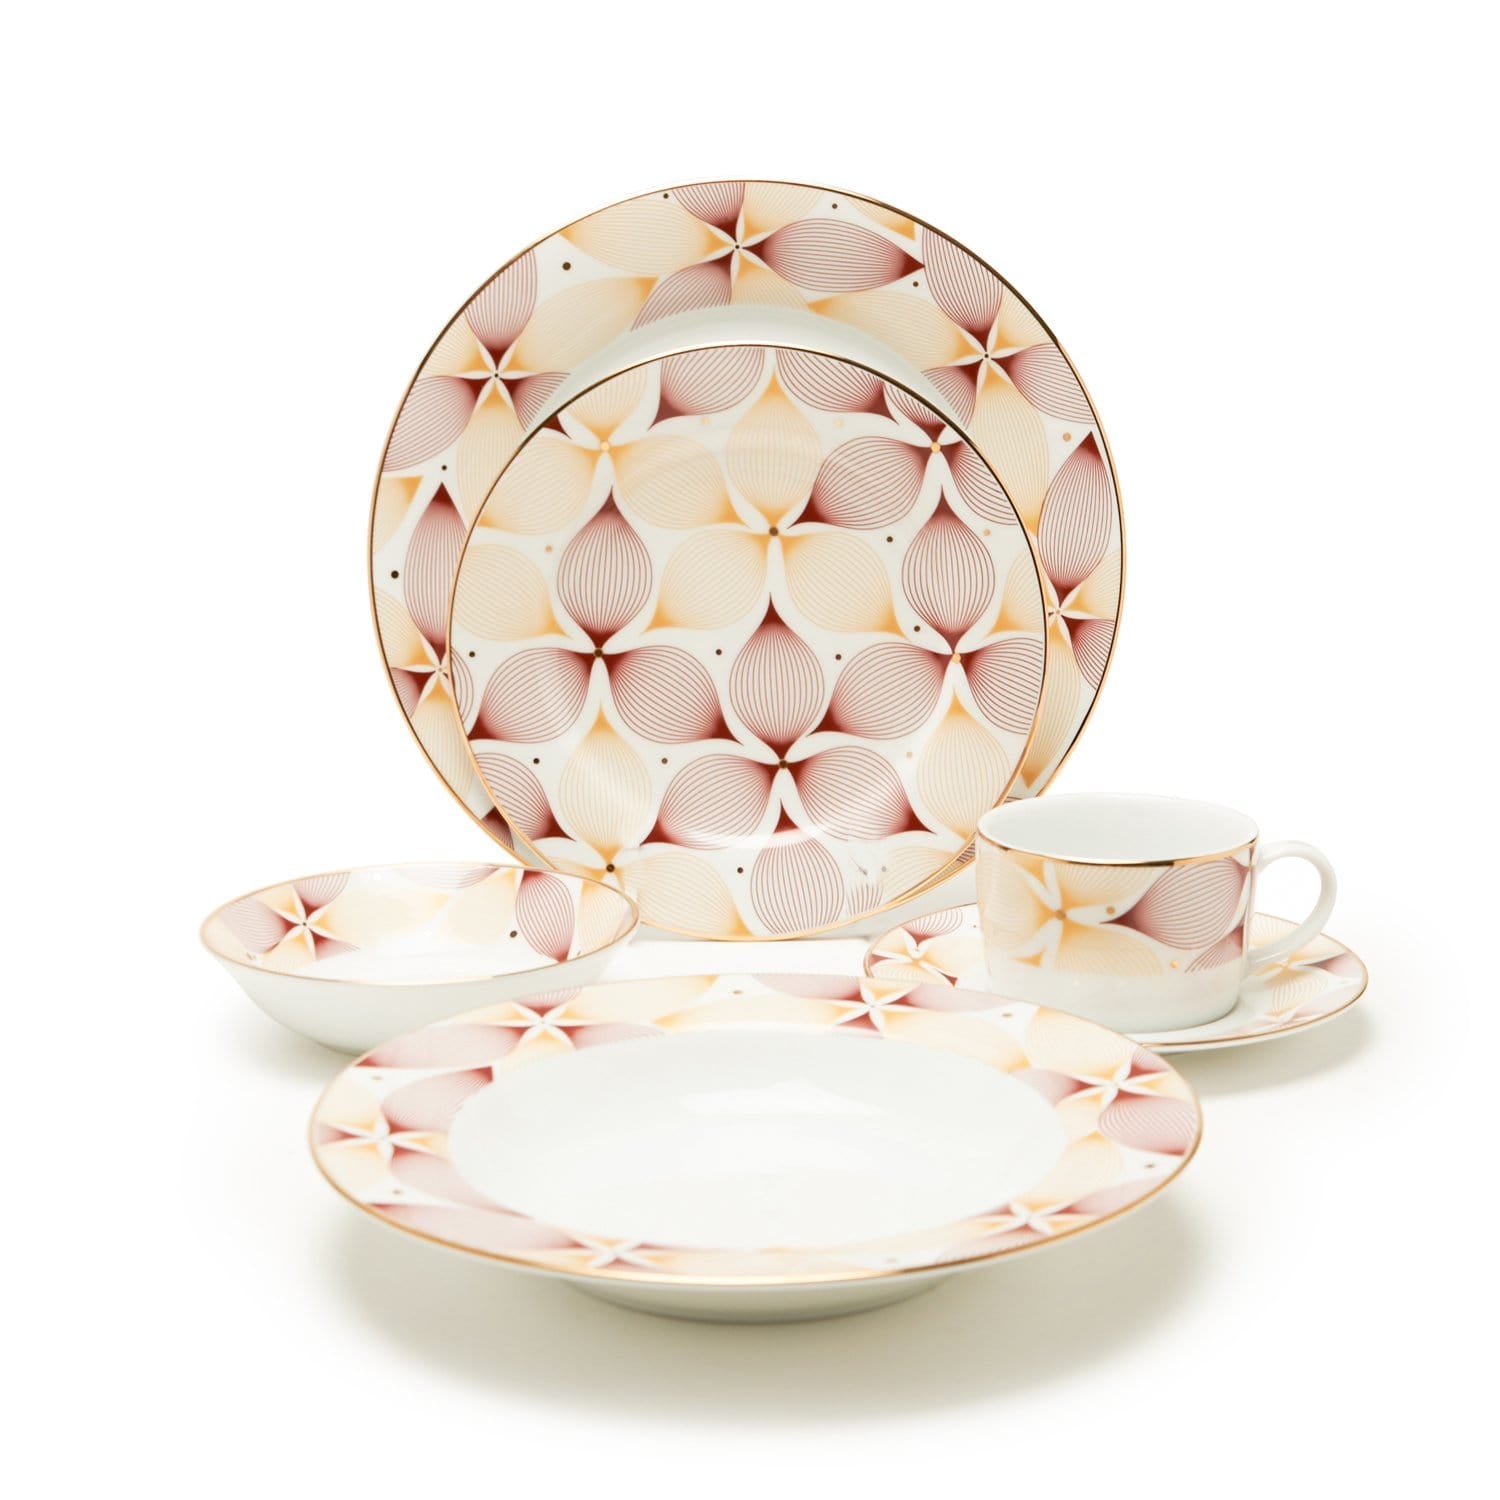 Hilary 24Pc Dinner Set - Hlry-24Ds